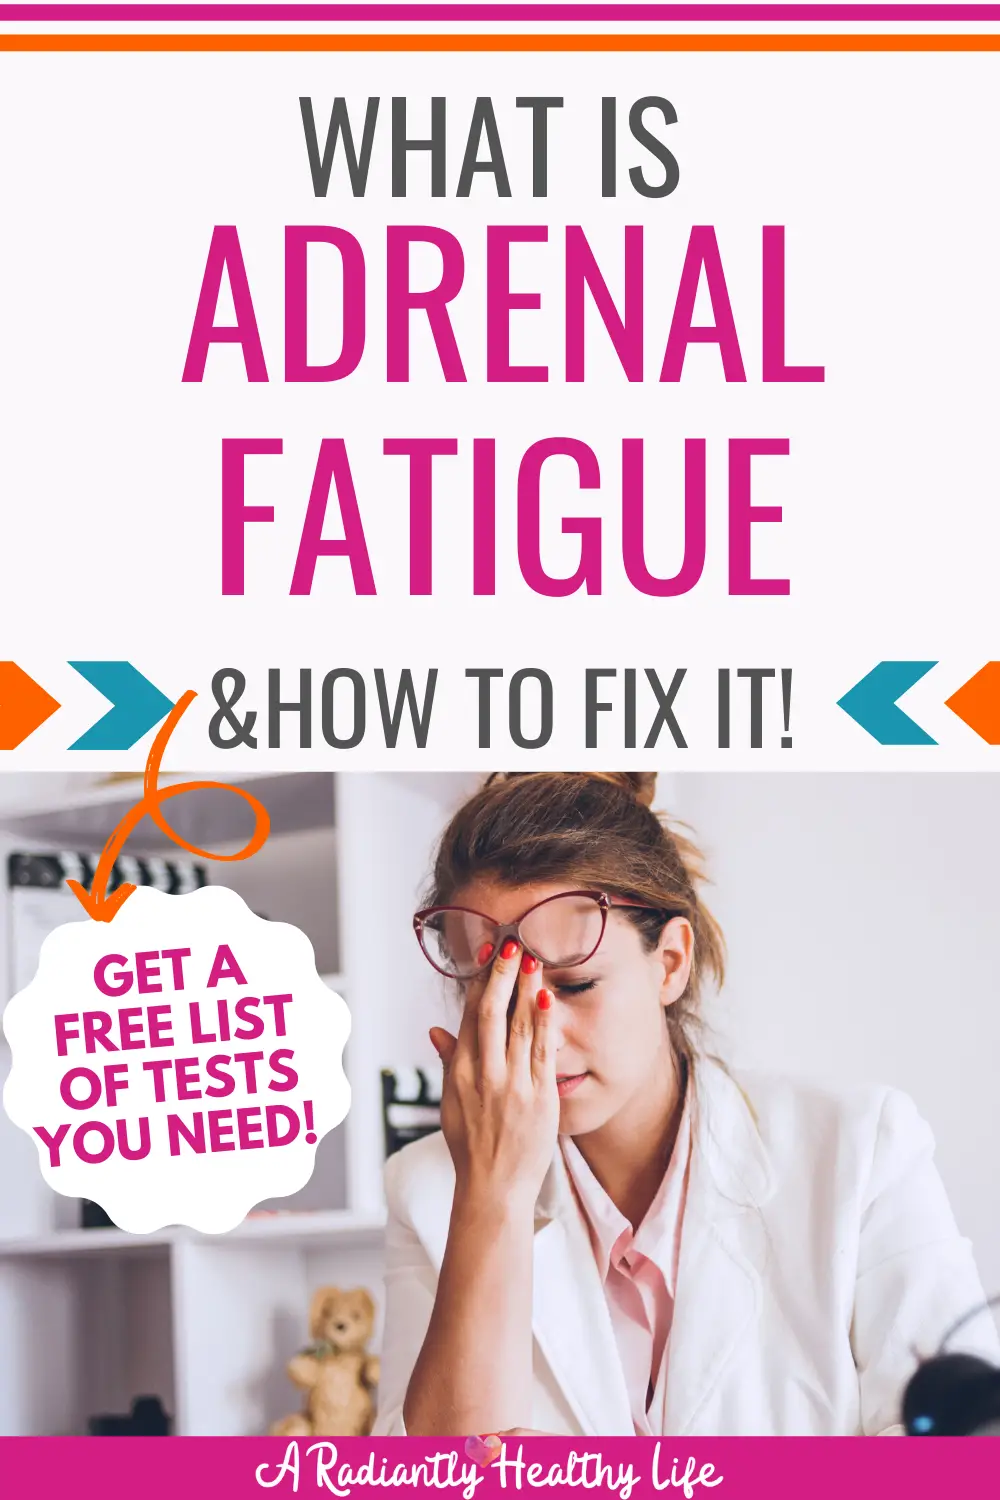 What Is Adrenal Fatigue? (And How To Fix It!)